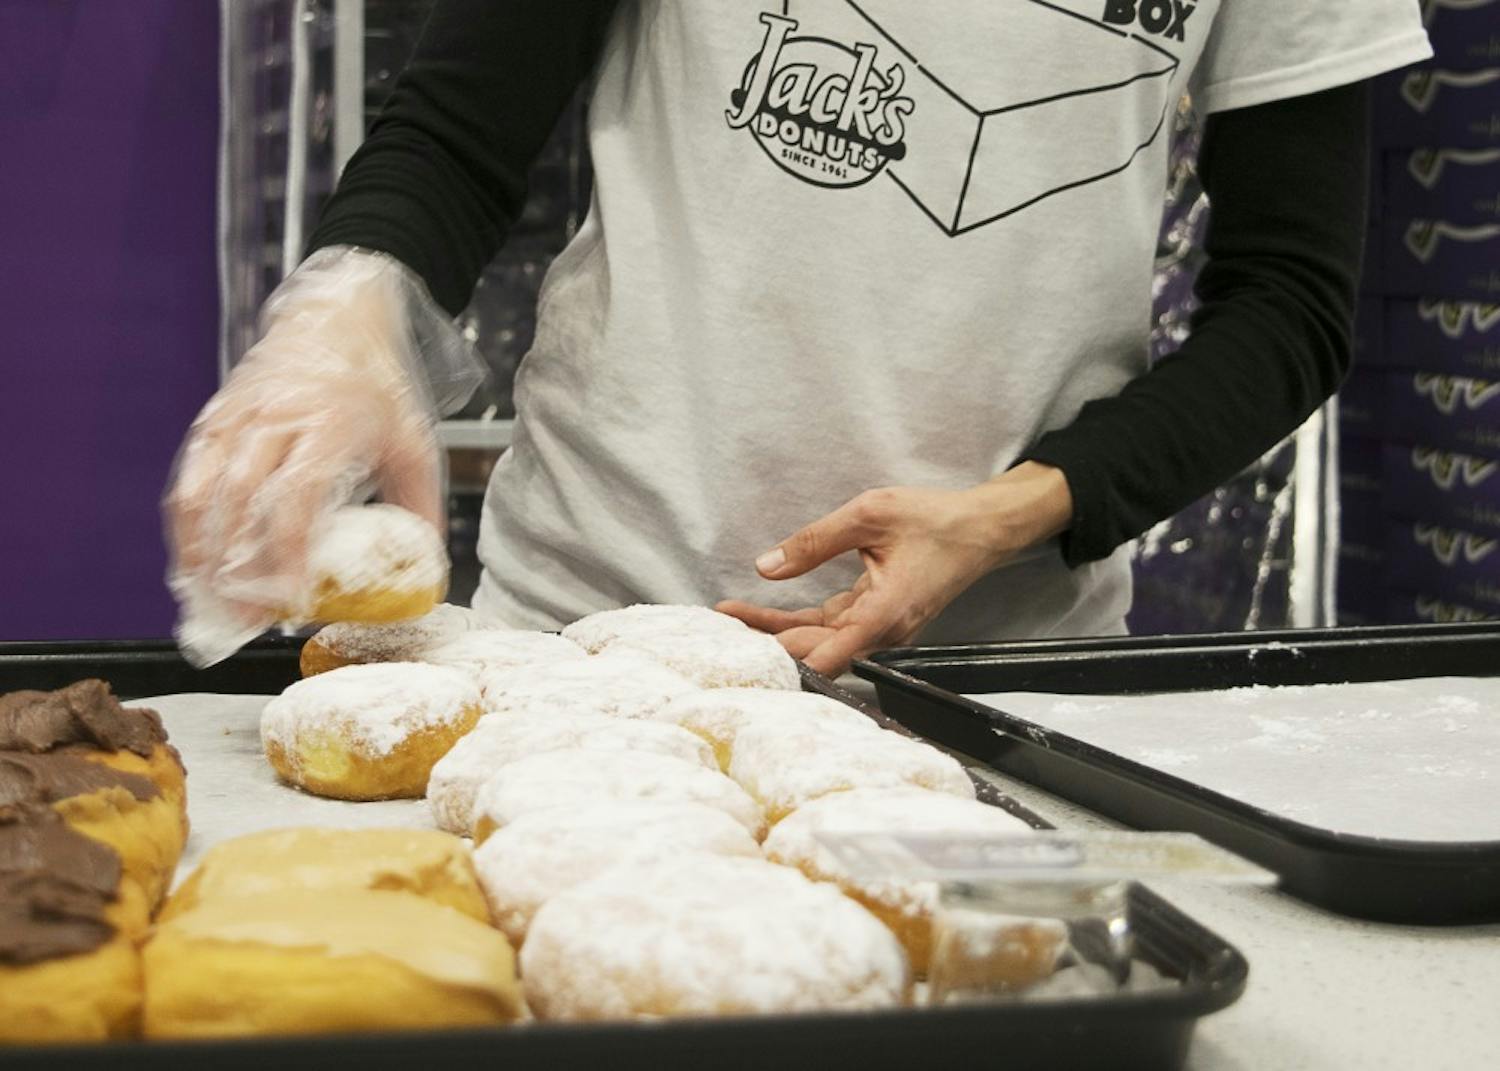 Jack's Donuts team member Jackie Willett transfers doughnuts to a tray in Jack's Donuts' Bloomington location on College Mall Road. Jack's Donuts, which originally opened in New Castle, Indiana, serves coffee and donuts.